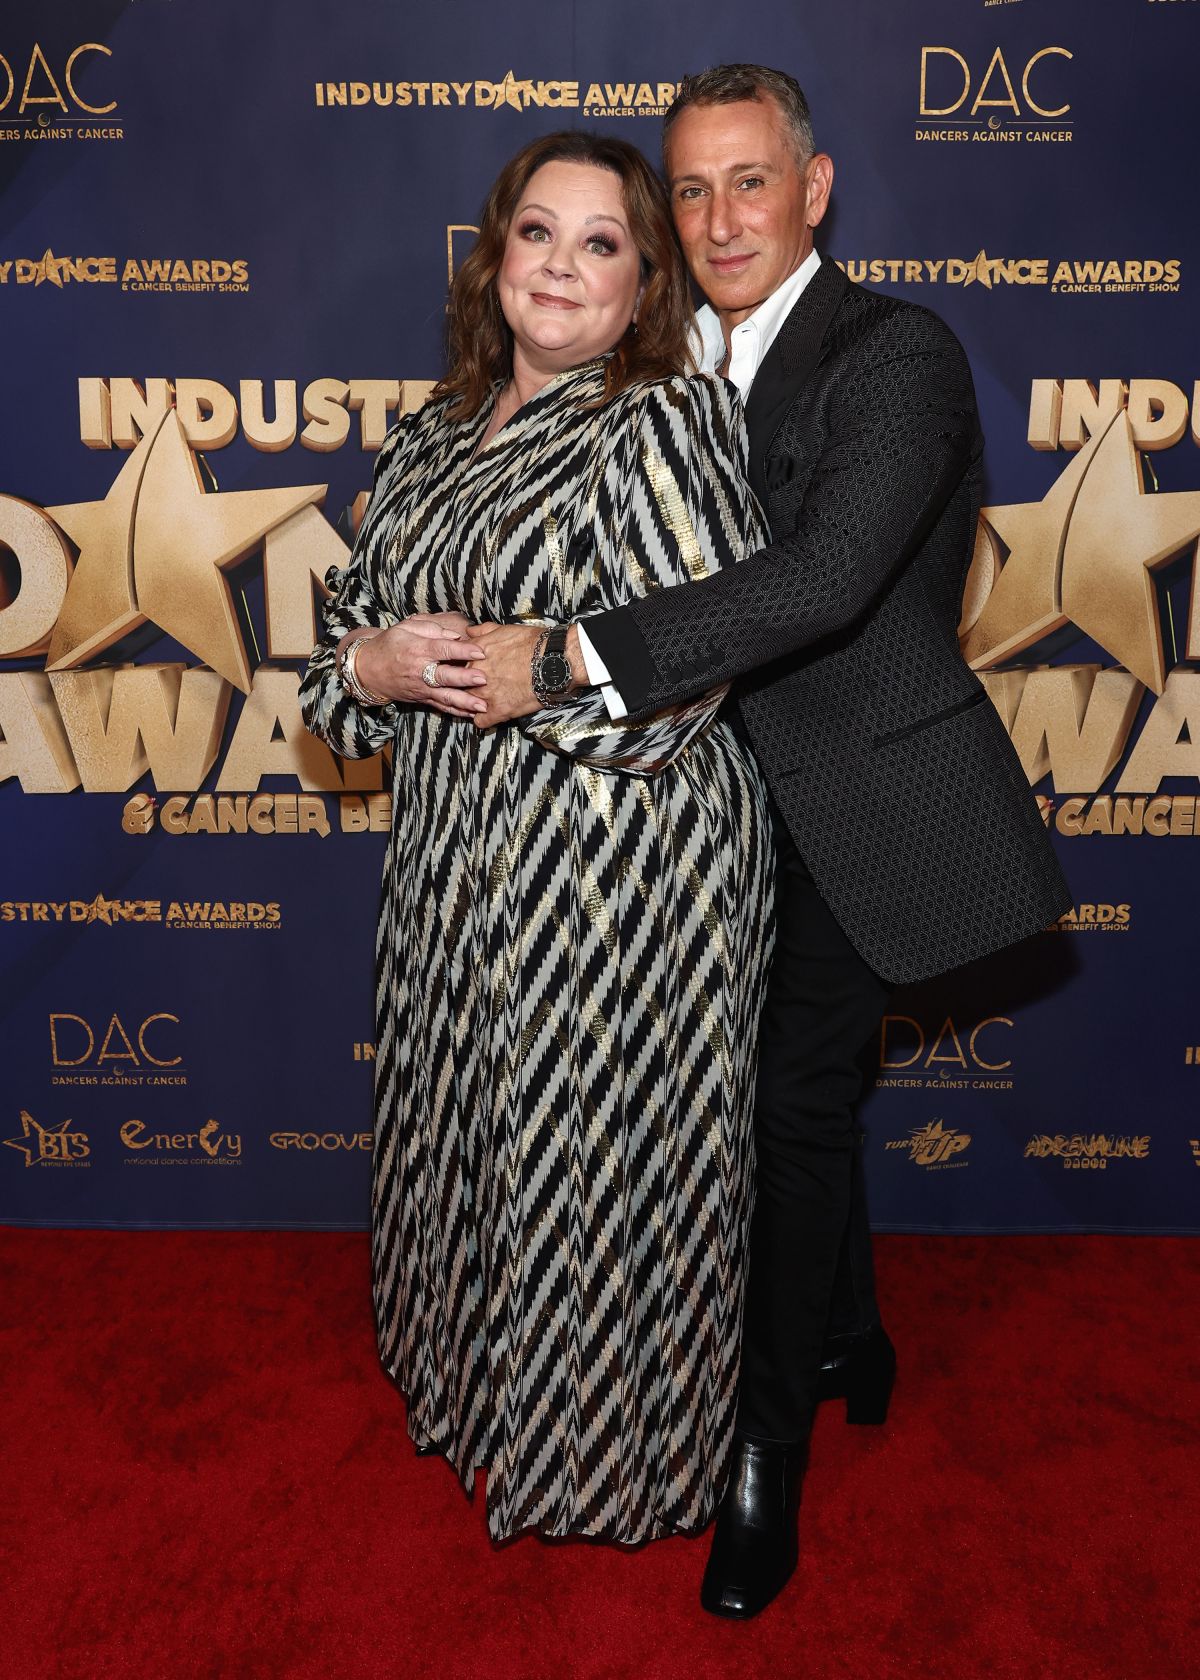 Melissa McCarthy attends 2022 Industry Dance Awards in Los Angeles, Oct 2022